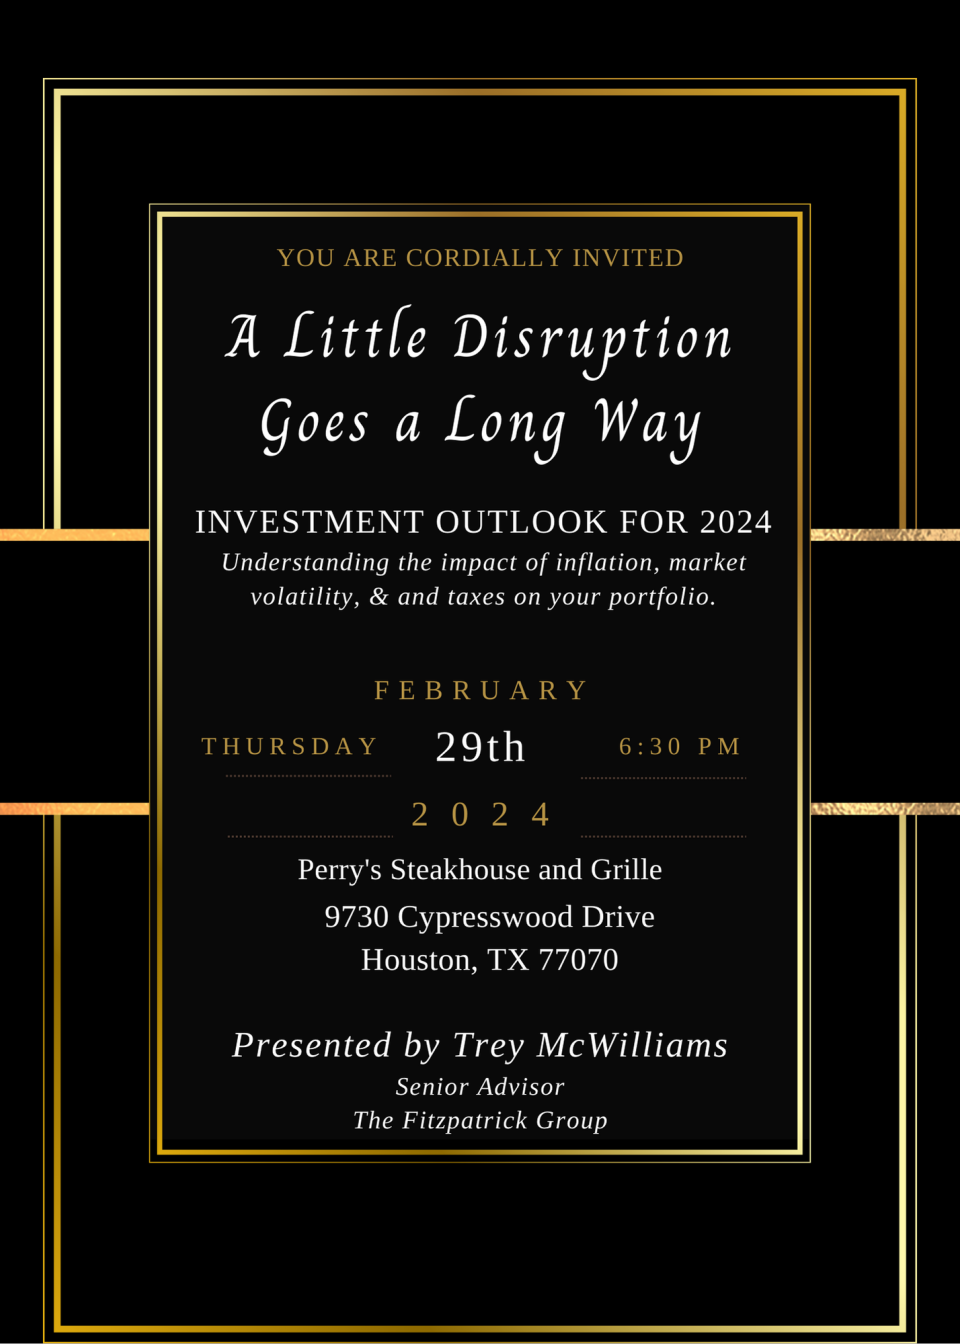 Would love to have you and a guest join me for dinner.  No sales pitch just some education about the financial services industry and 2024!  Let me know if you can join me!  Dinner is on me!